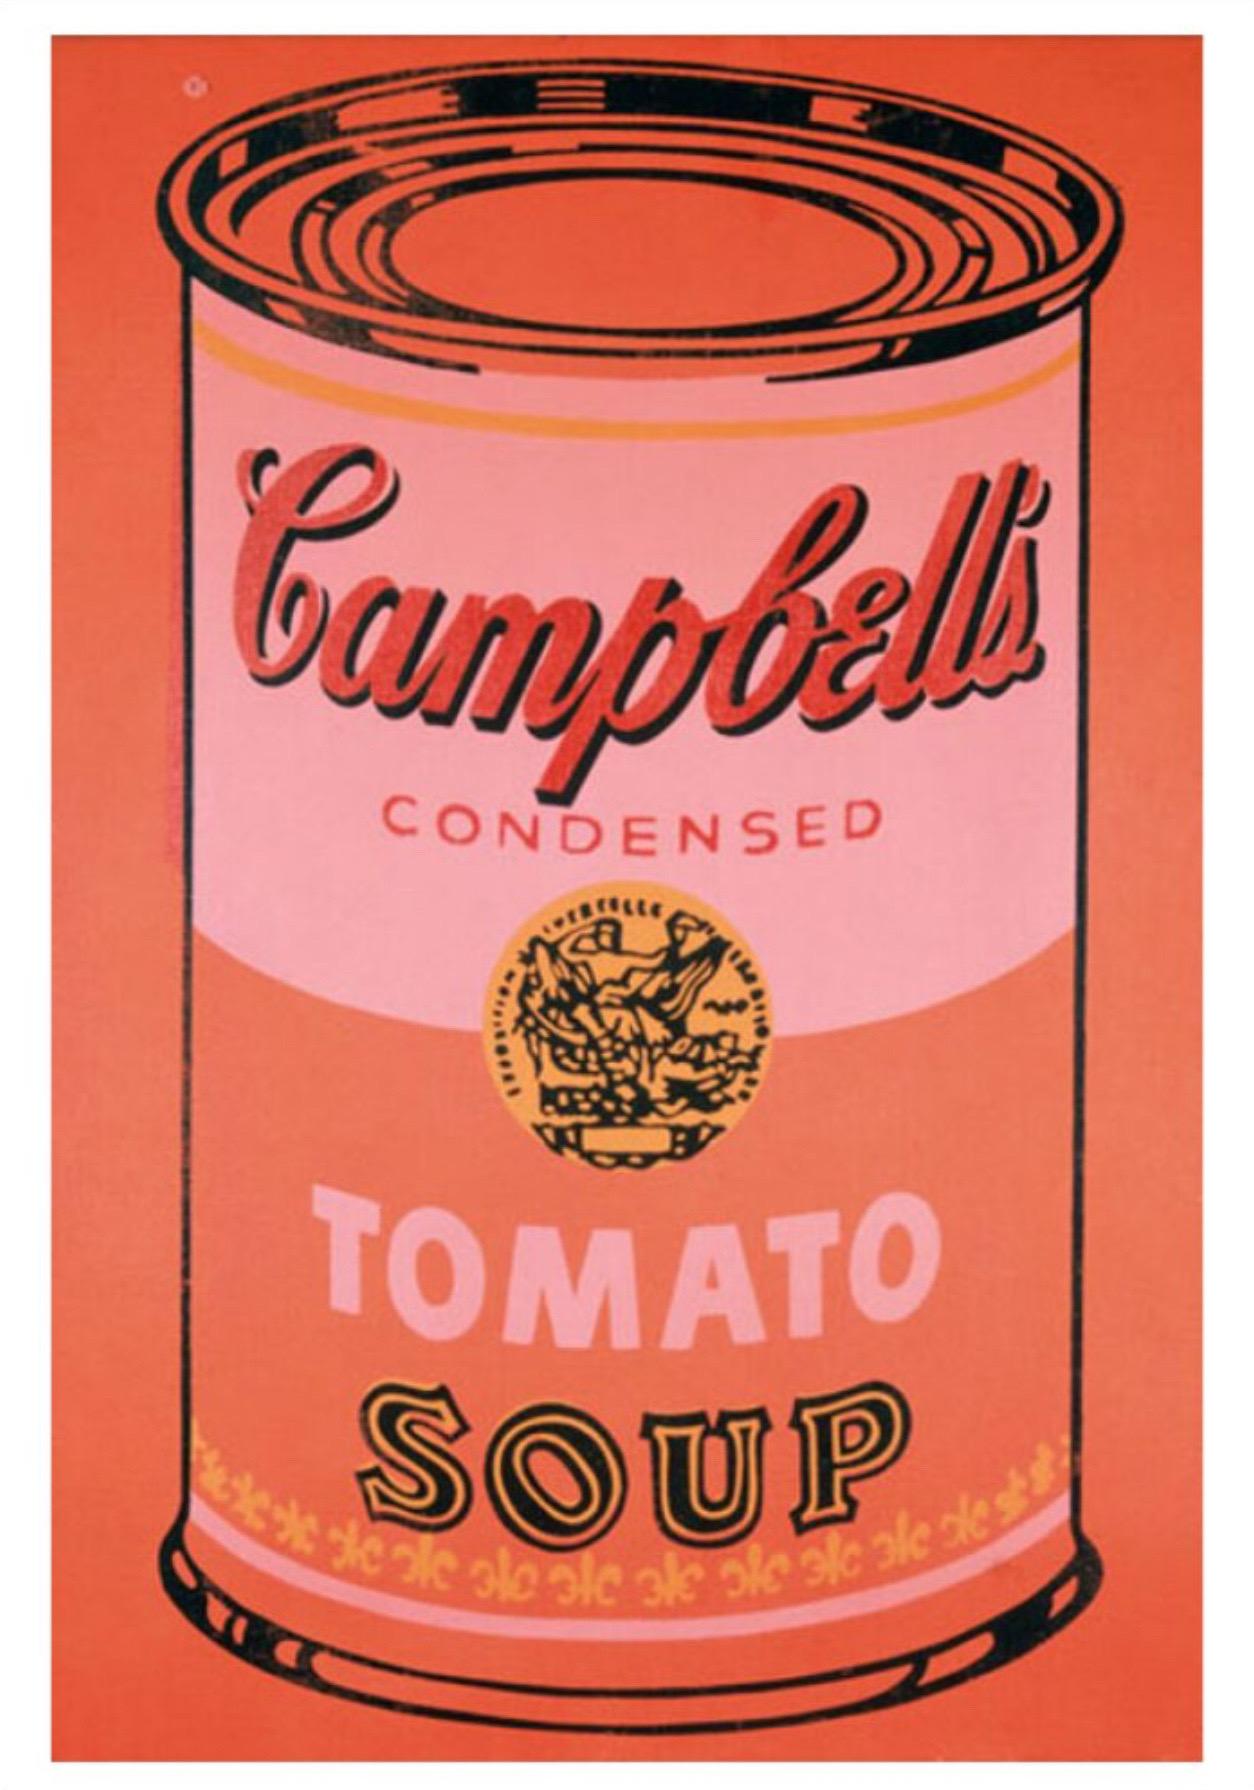 Andy Warhol, Campbell's Soup Can, 1965 (orange)